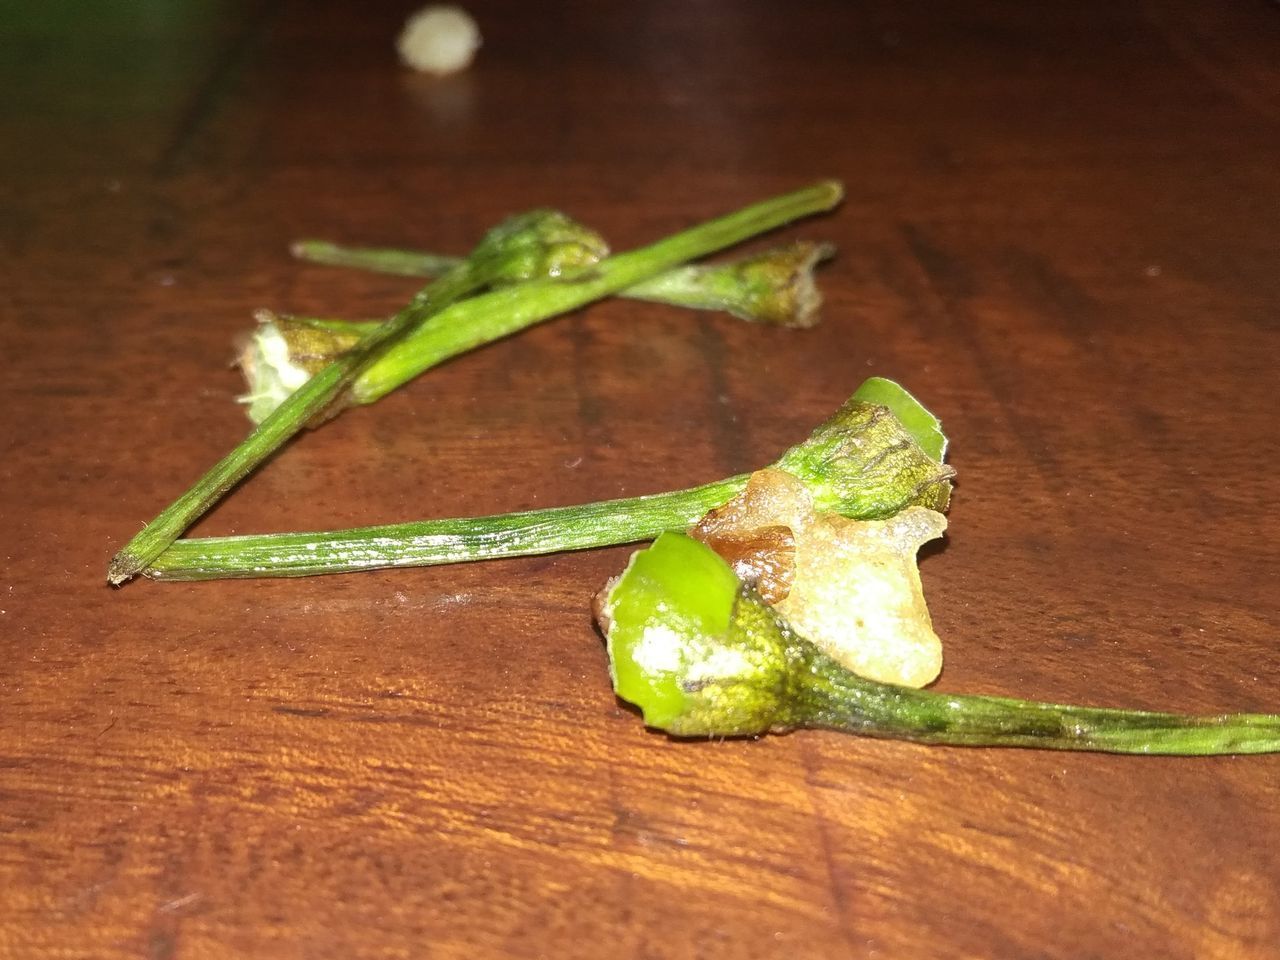 CLOSE-UP OF GREEN CHILI PEPPERS ON TABLE